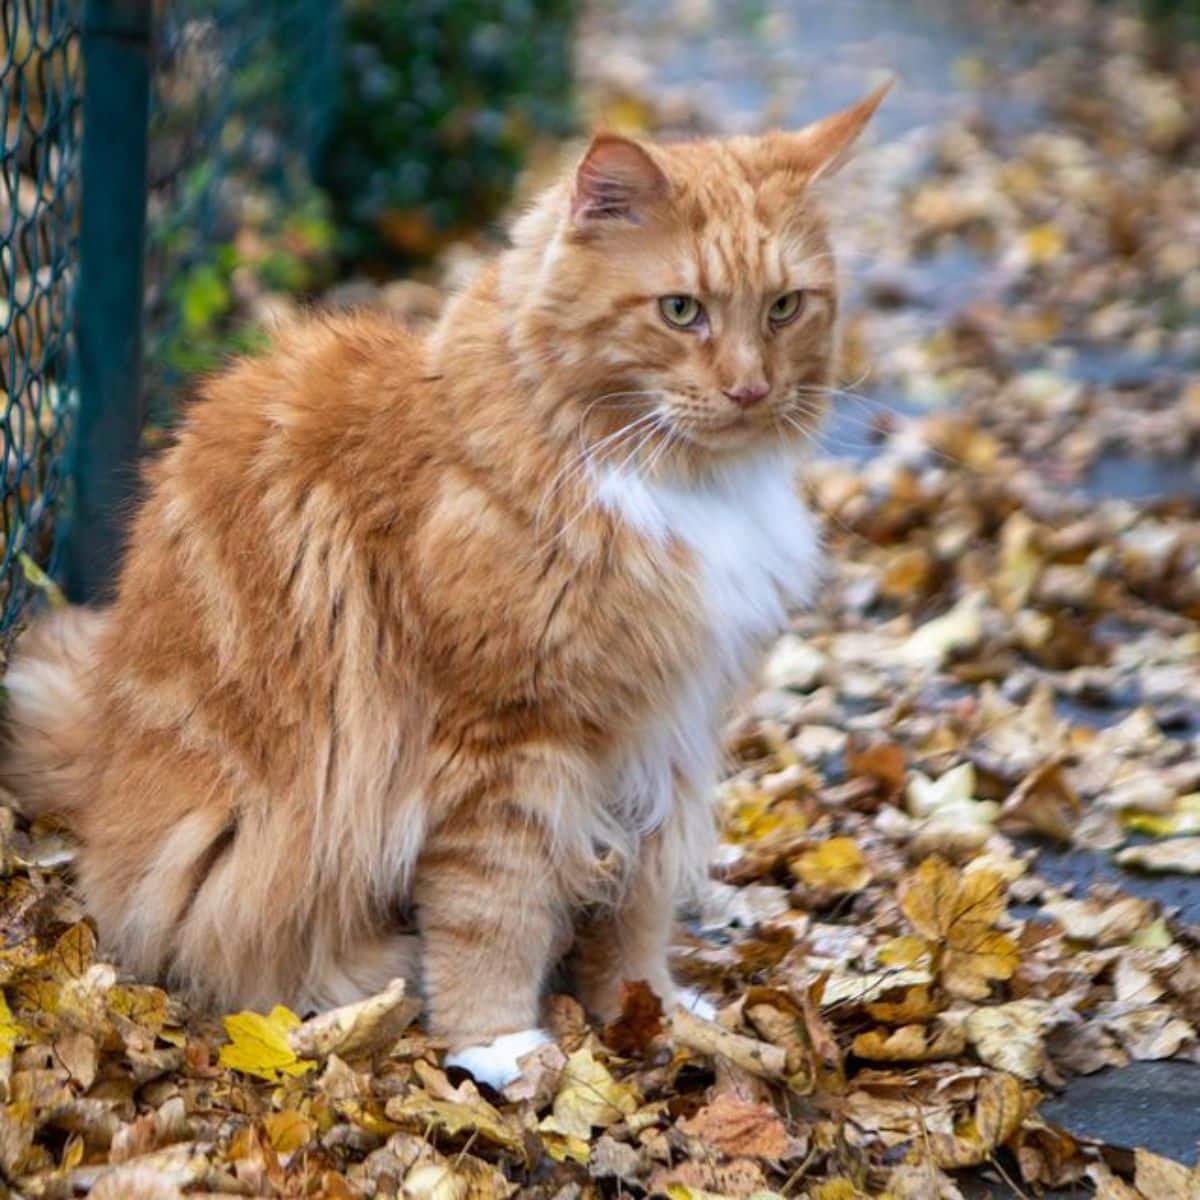 A beautiful ginger maine coon sitting on a pavement partially covered by fallen leaves.